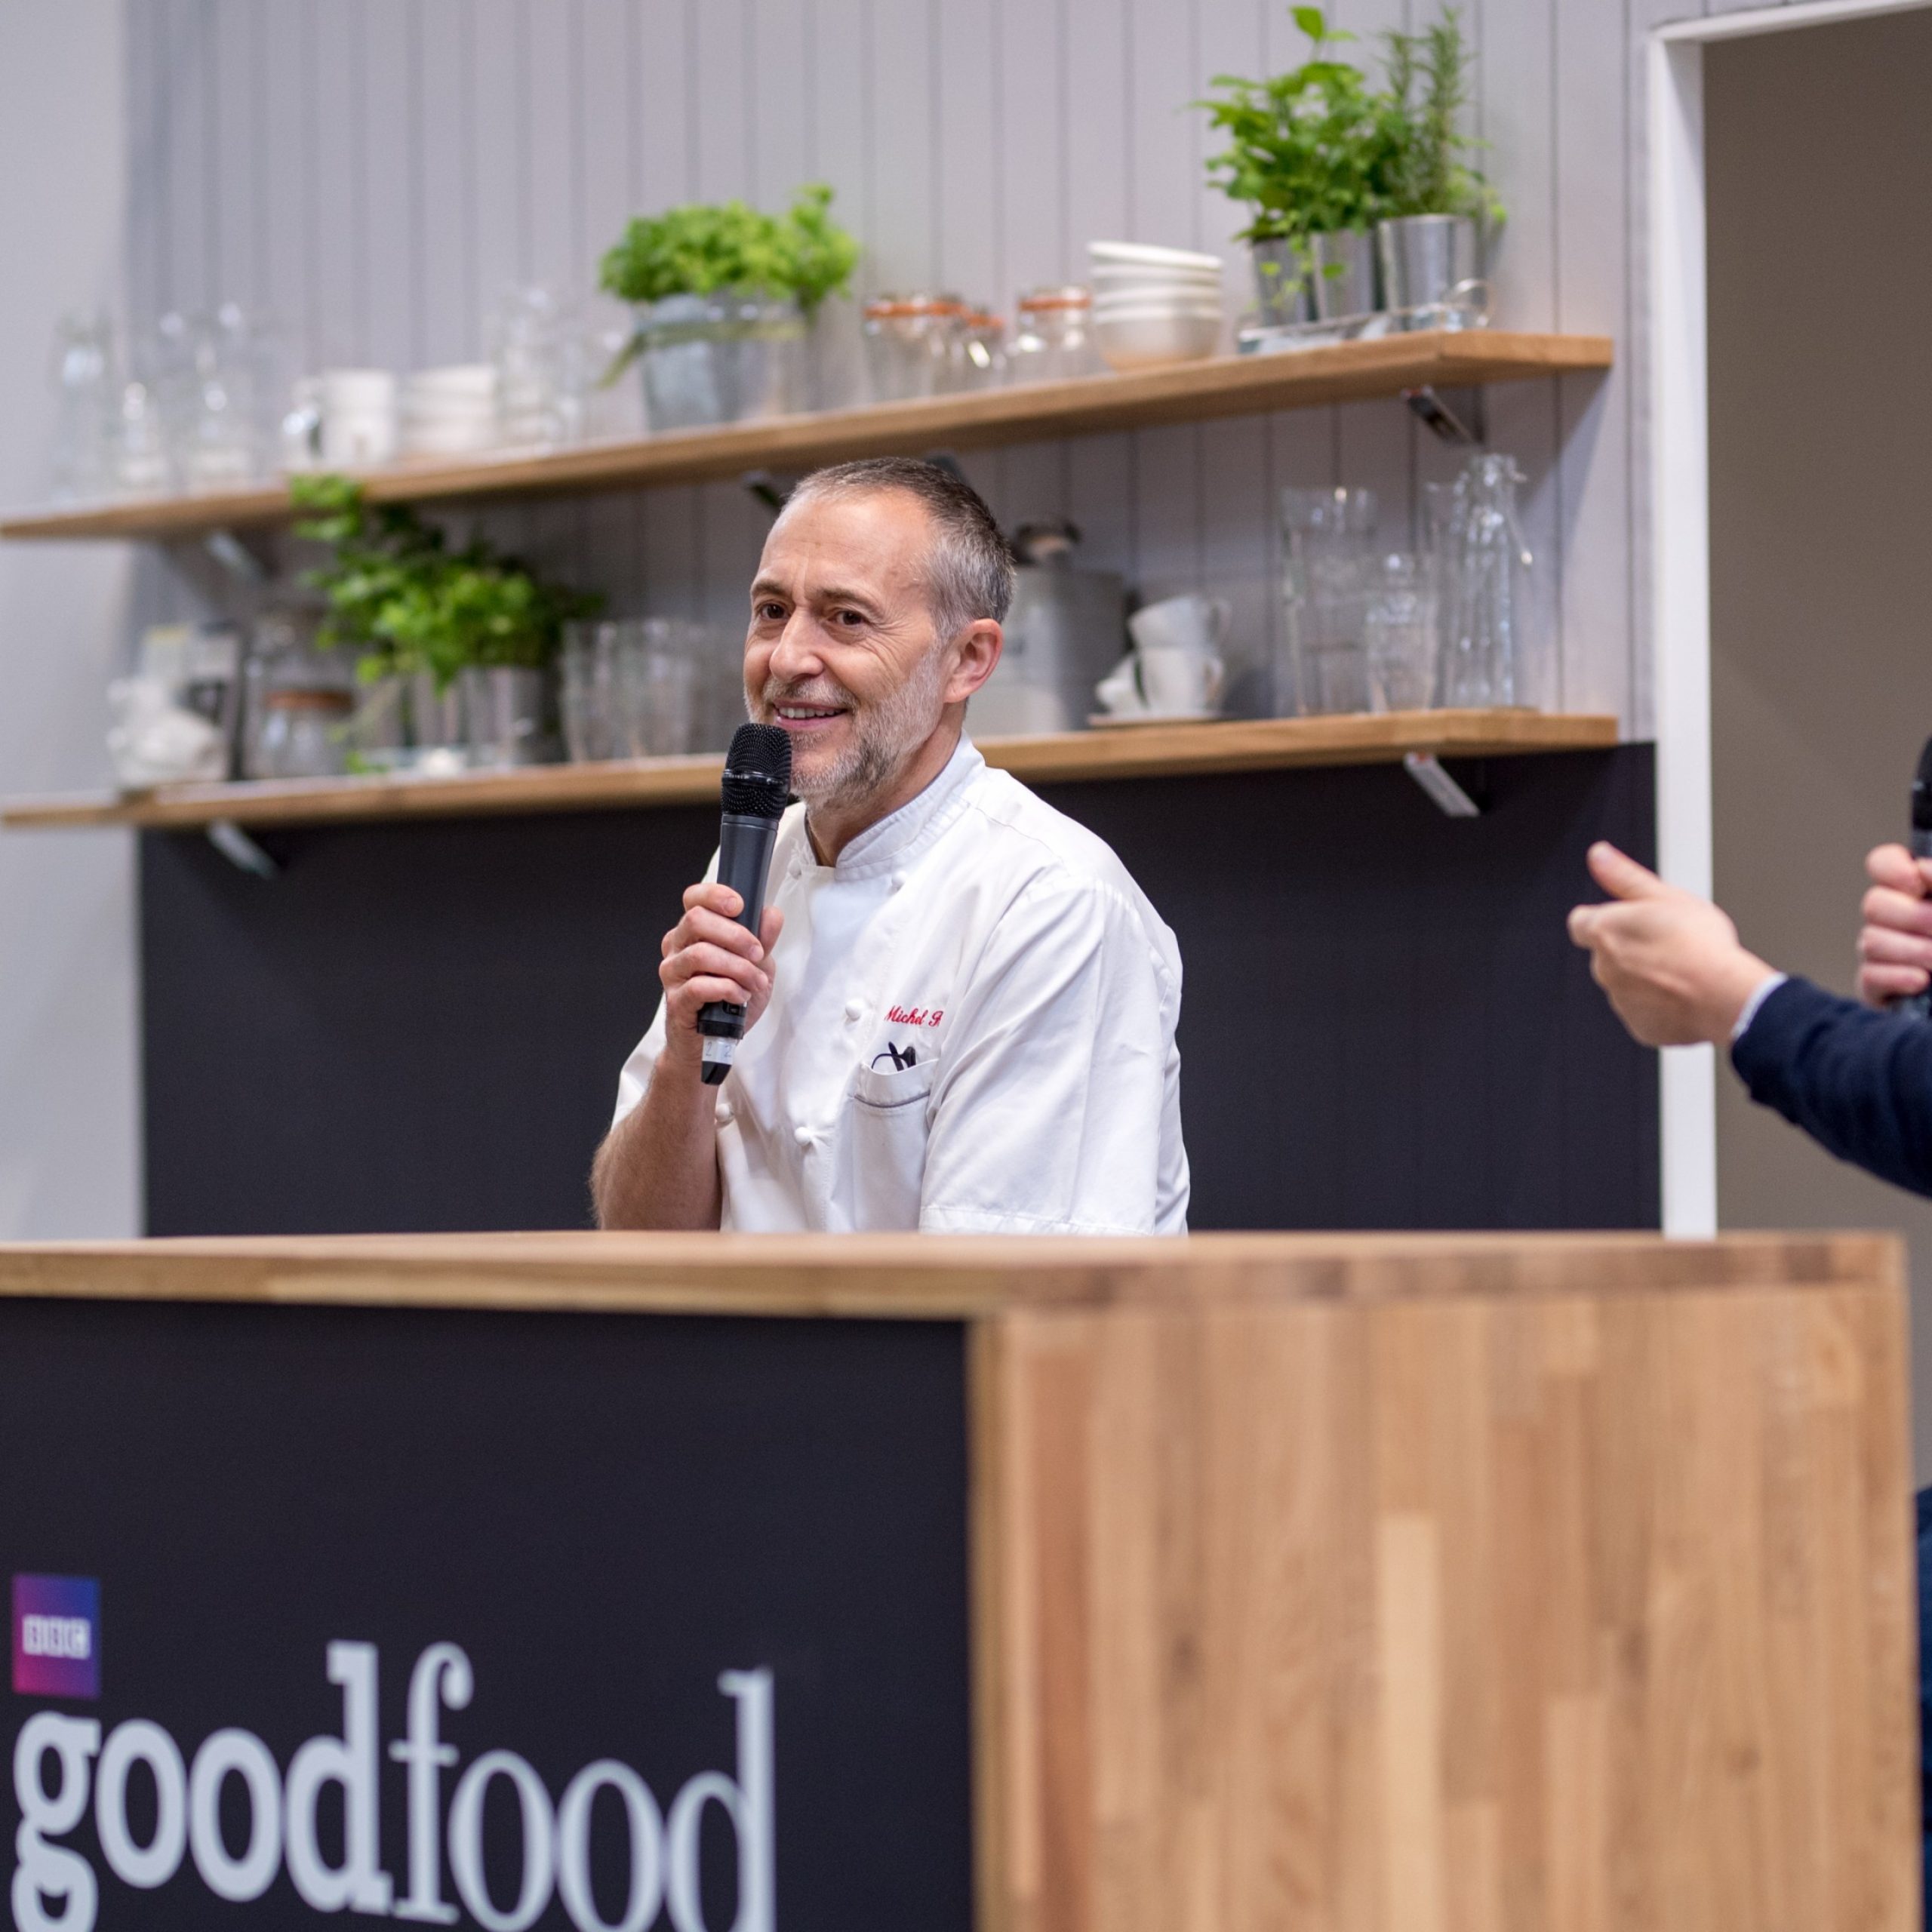 Michel Roux in the Let's Talk Good Food Stage - click to learn more